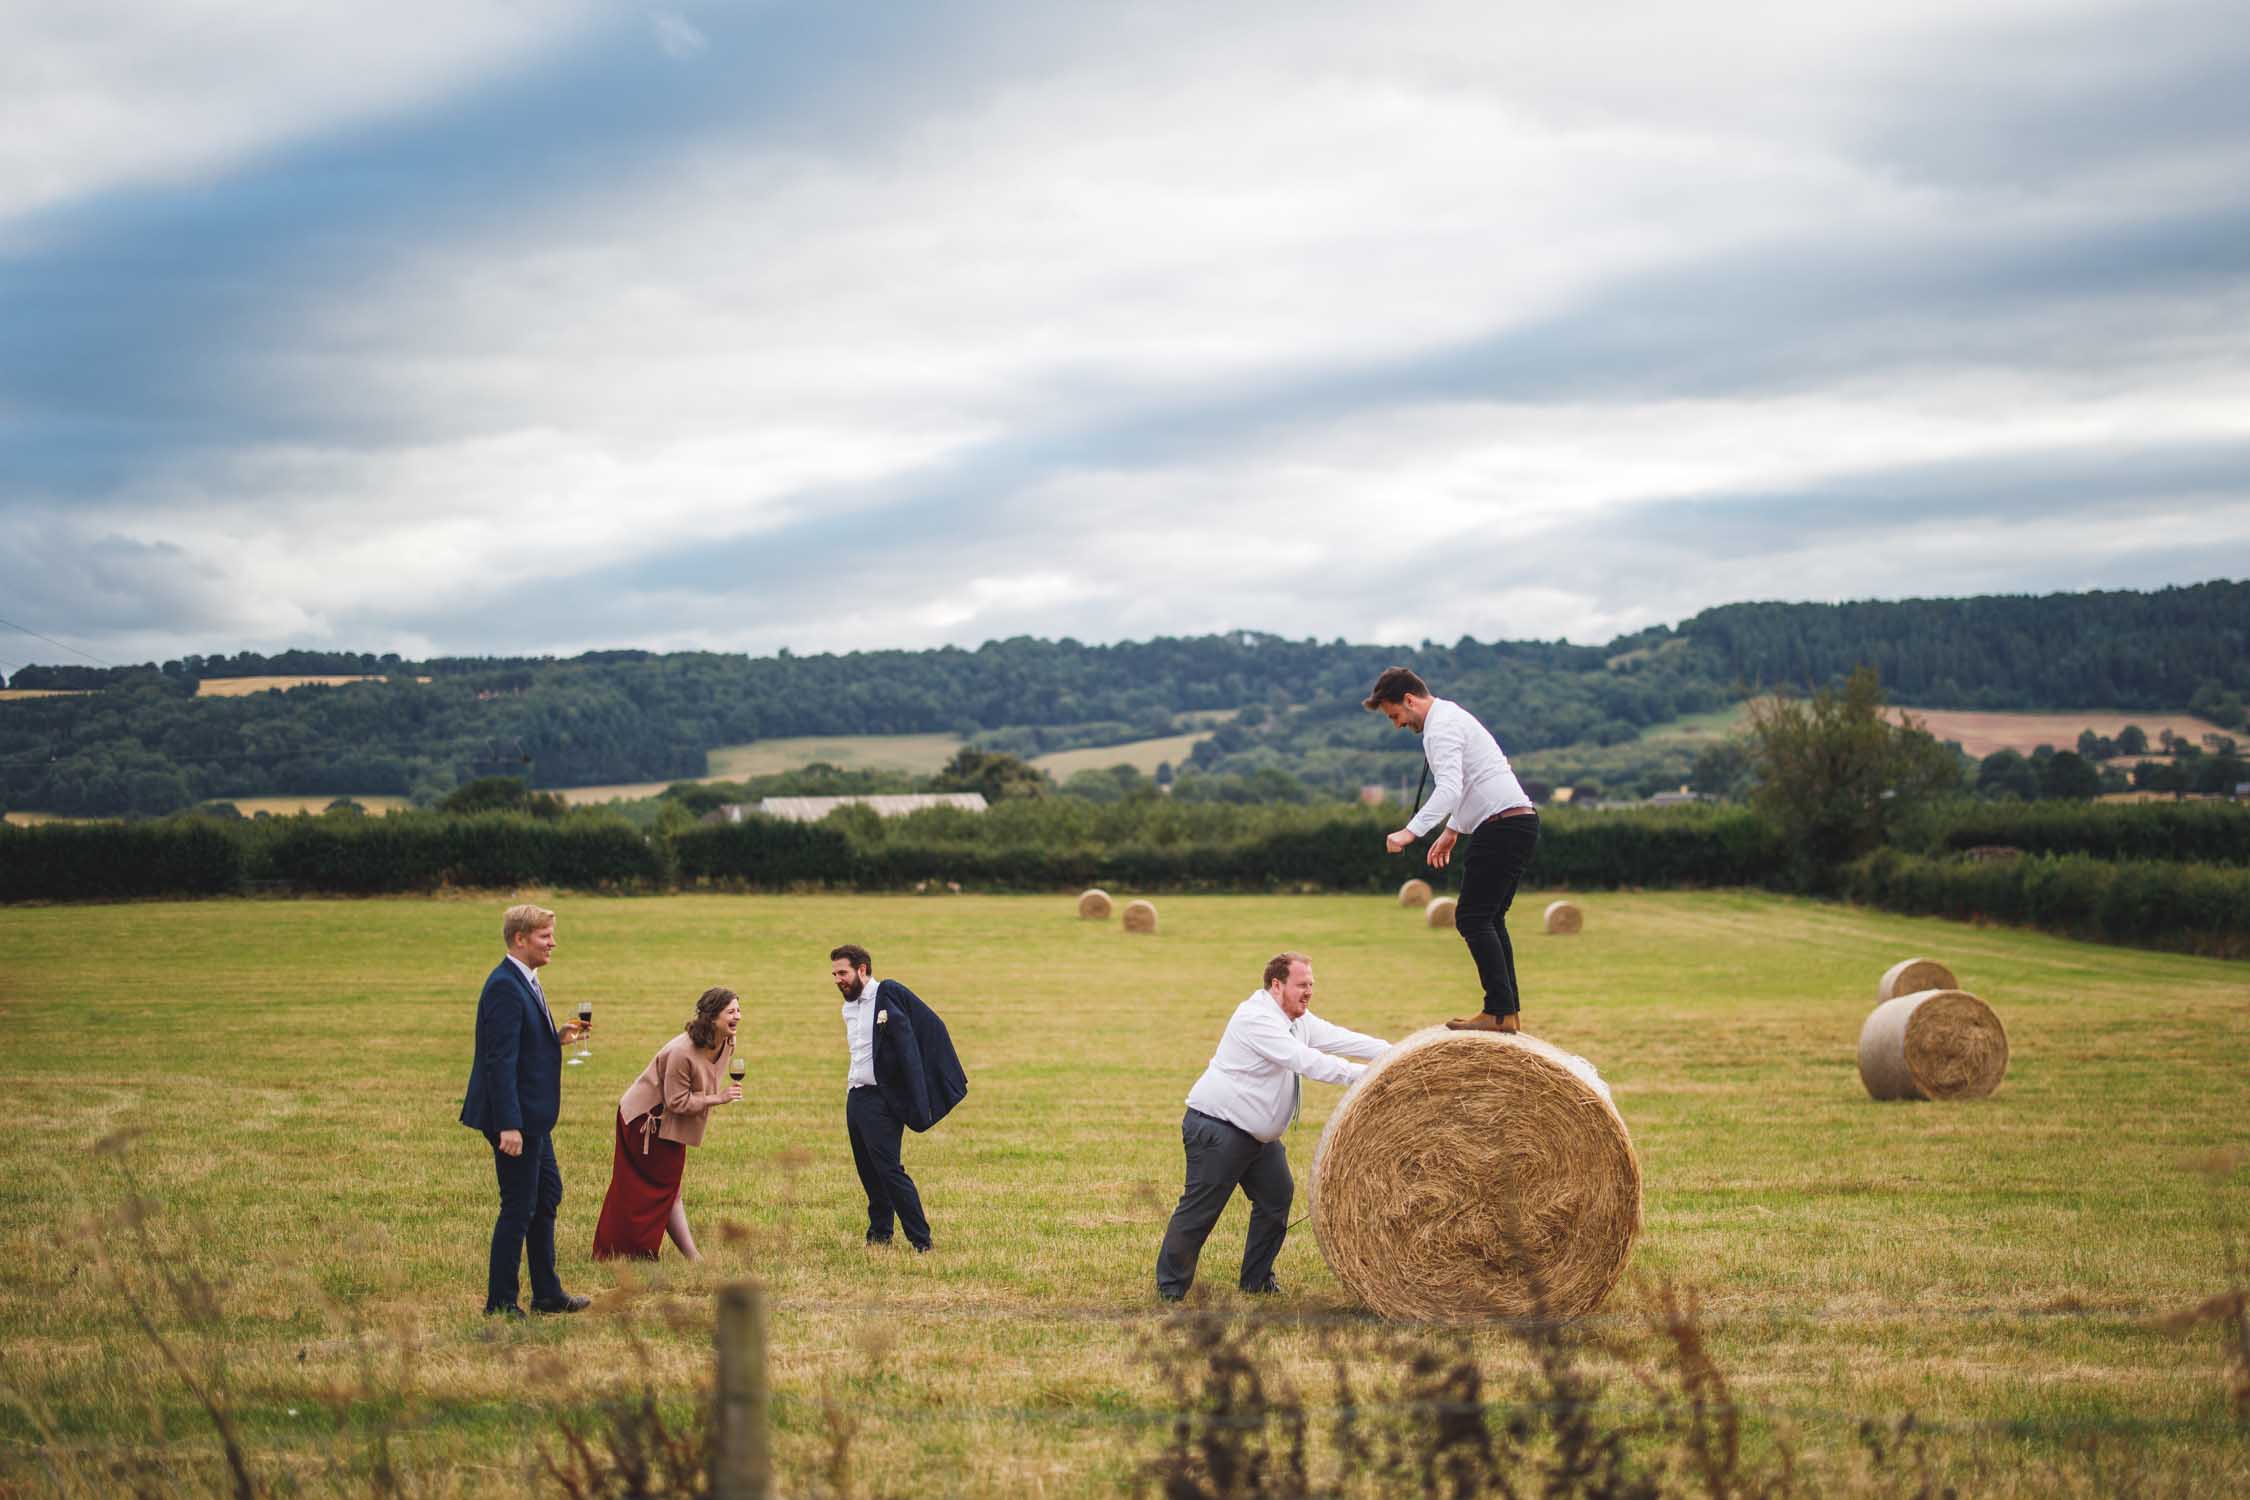 Wedding Photographers in Herefordshire, Herefordshire Wedding Photographer, Herefordshire Wedding, Wedding in the West Midlands.